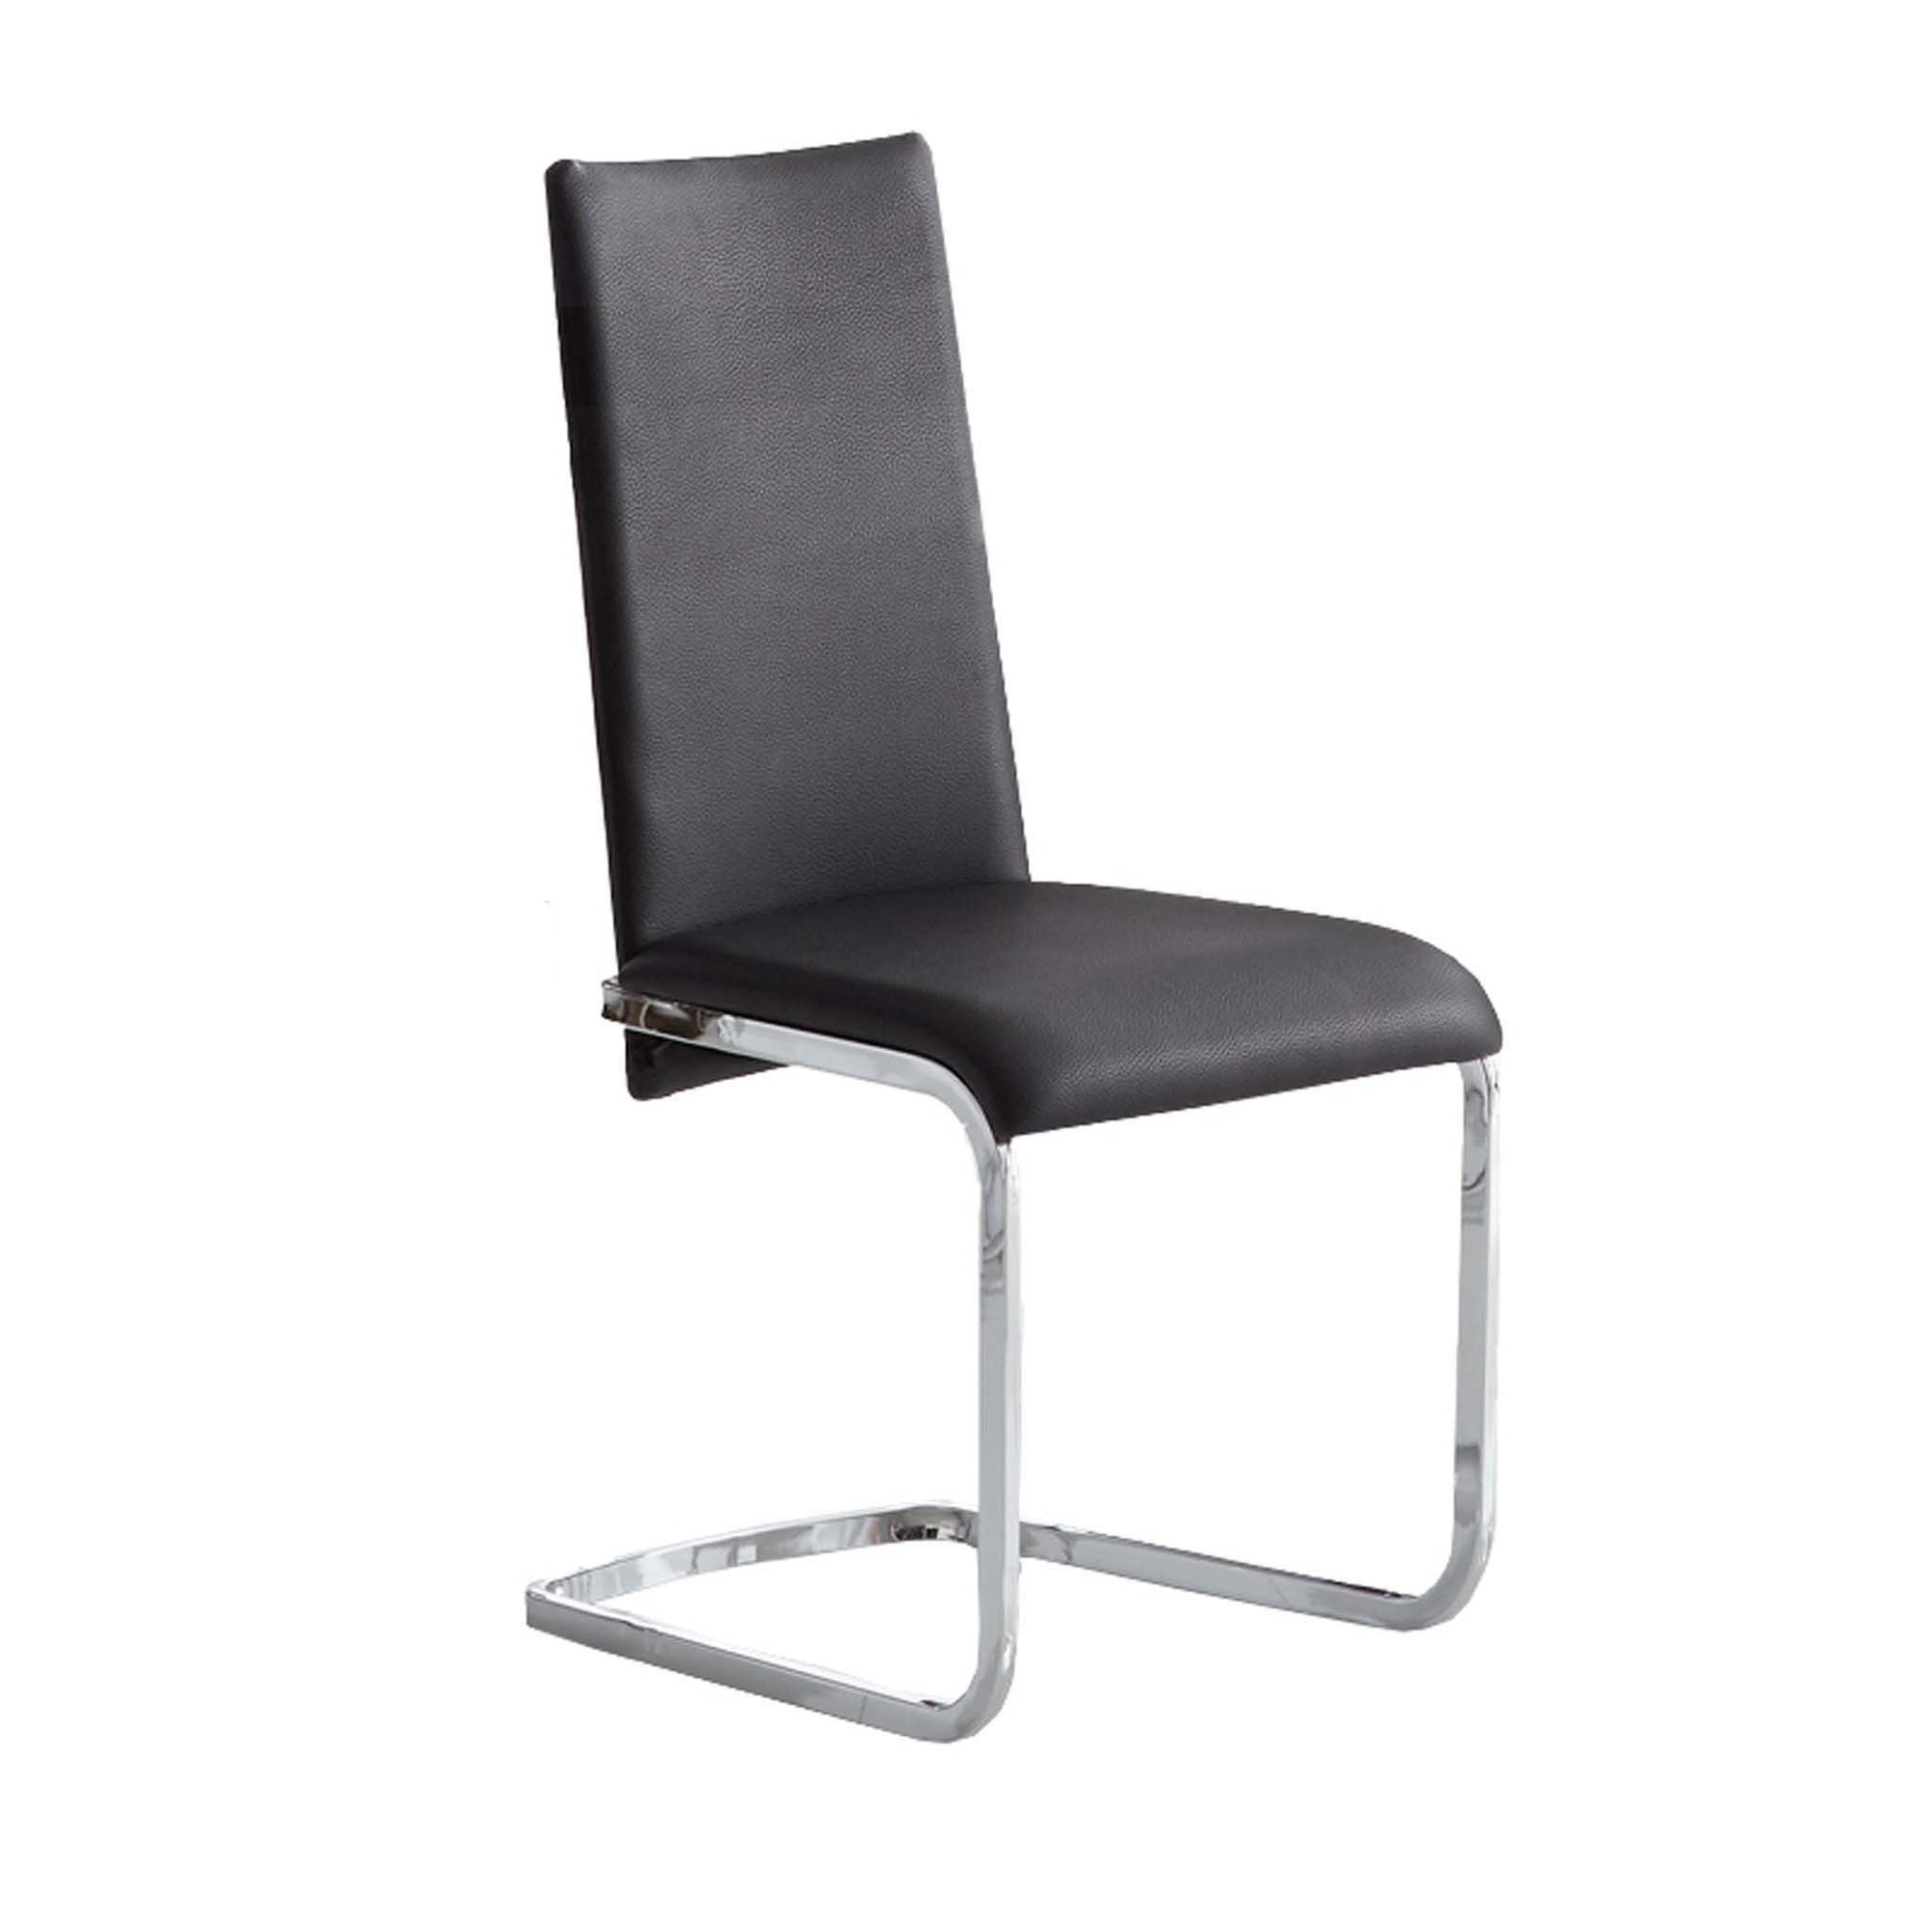 Bellini-Jolie Dining Chair-Dining Chairs-MODTEMPO